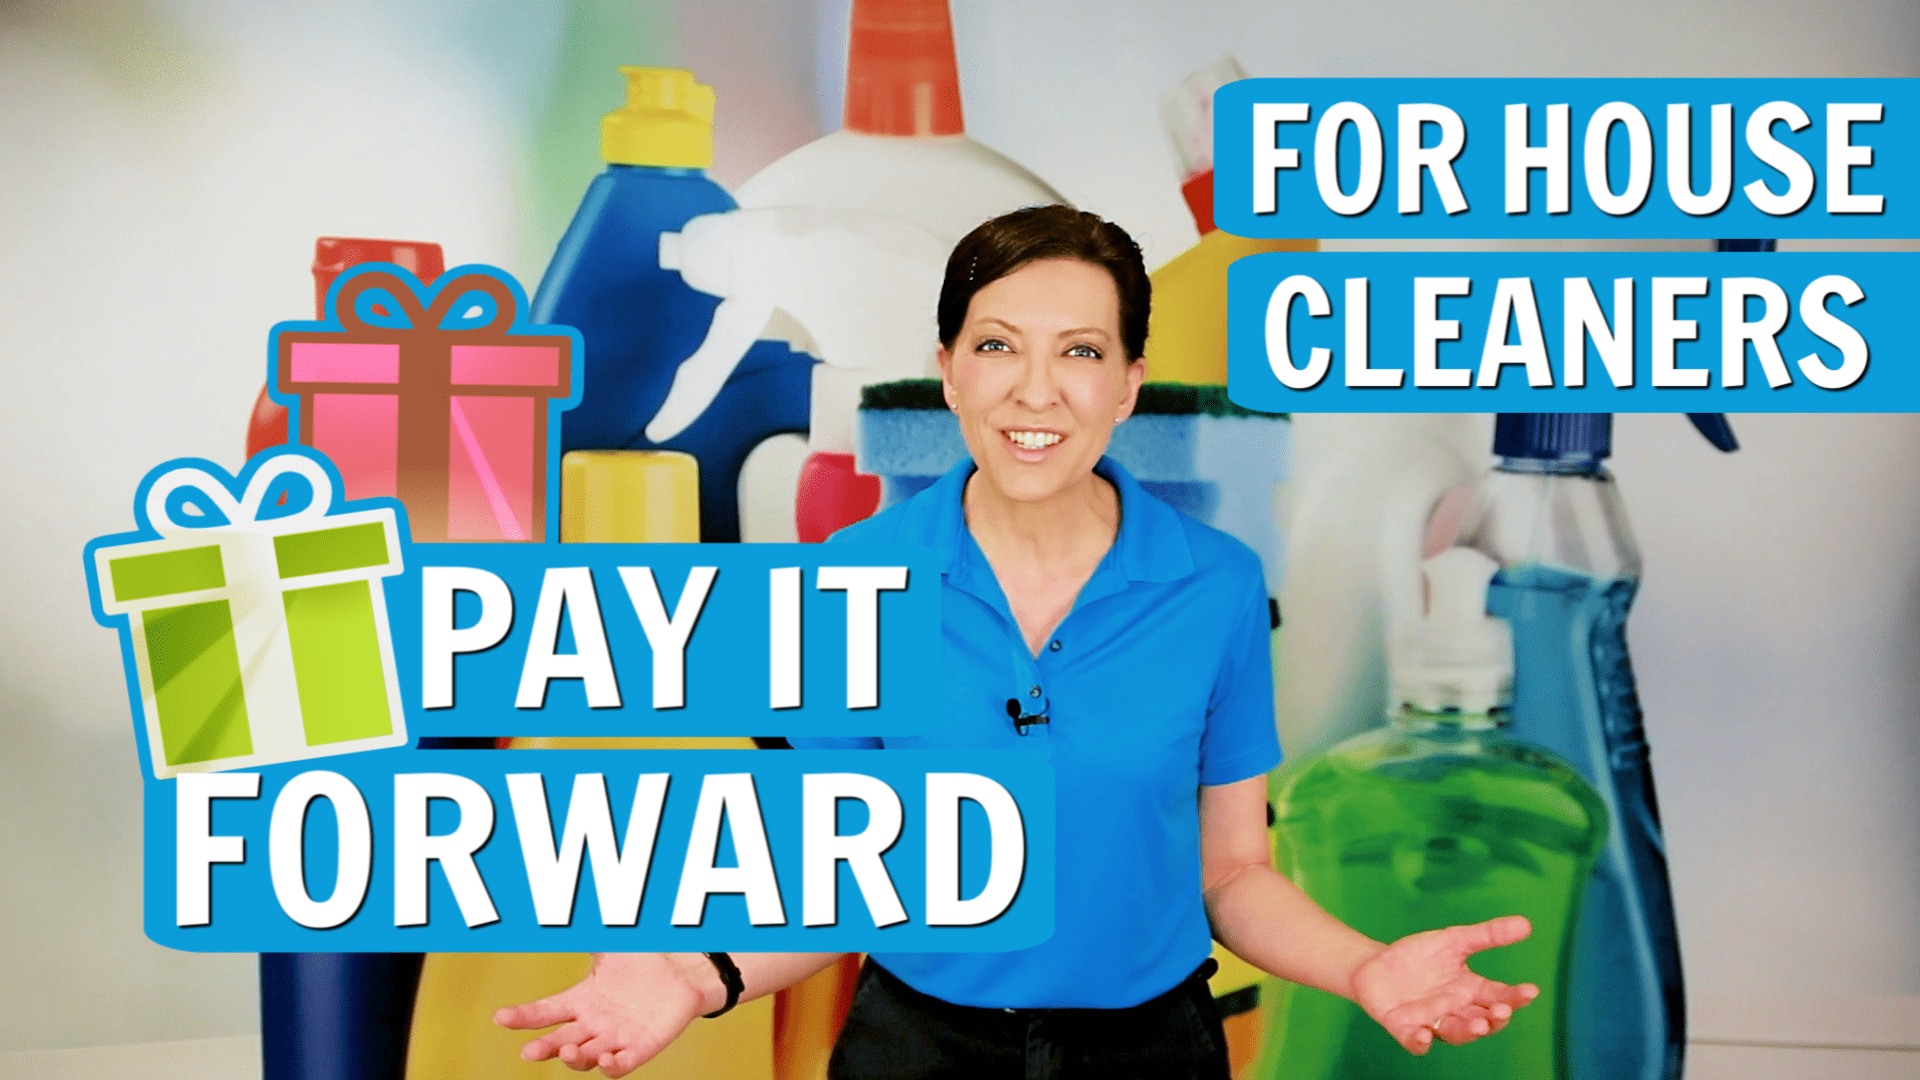 Pay It Forward for House Cleaners, Angela Brown, Savvy Cleaner